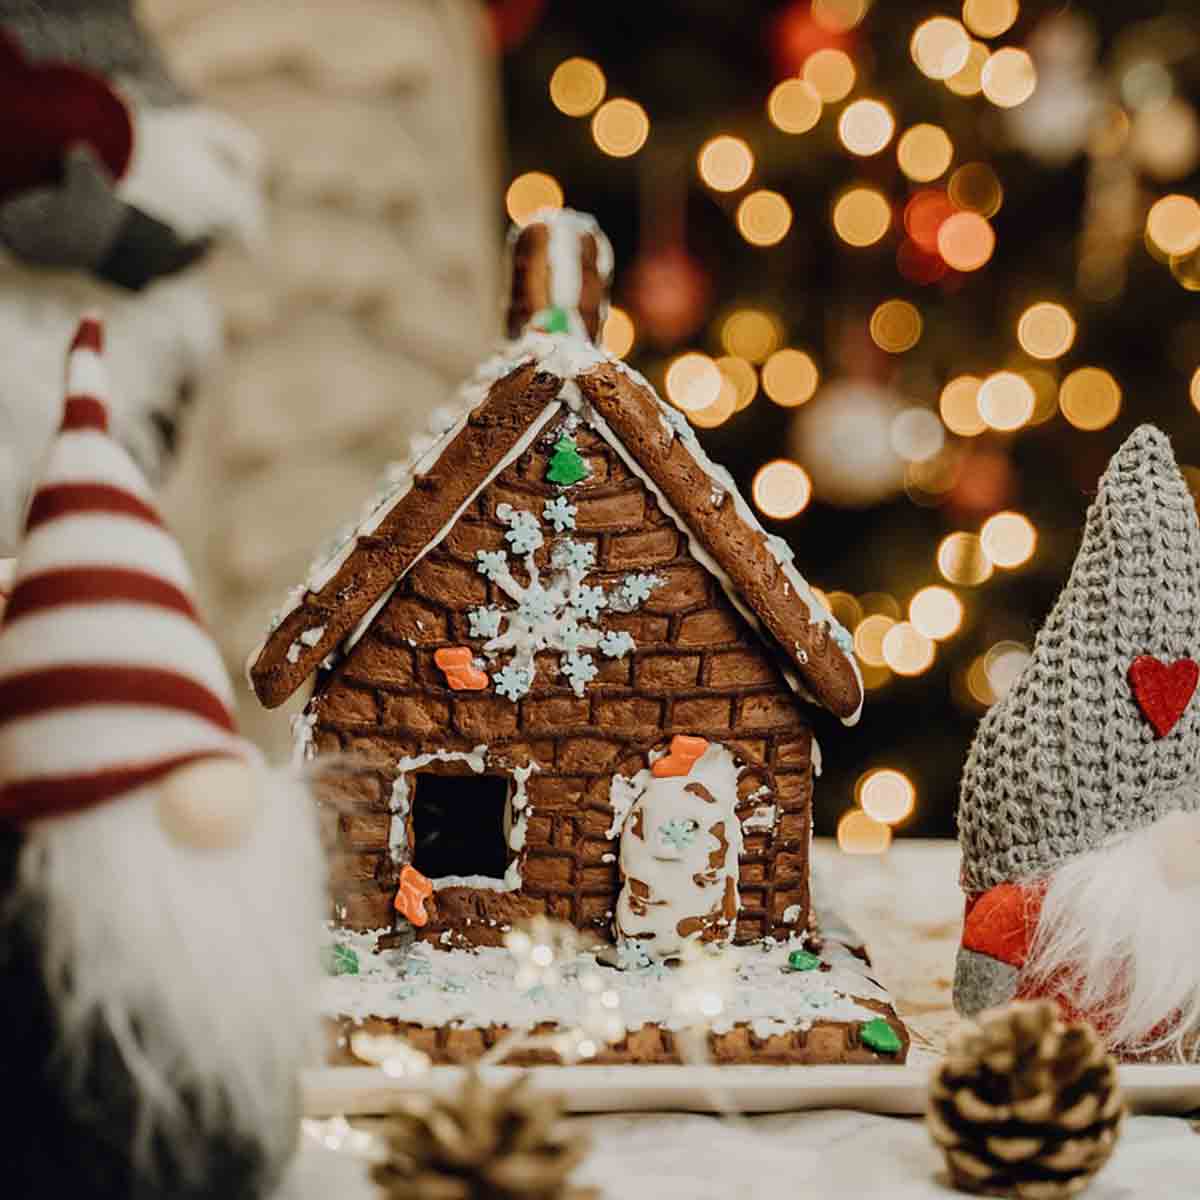 Gingerbread House Surrounded By Christmas Decorations